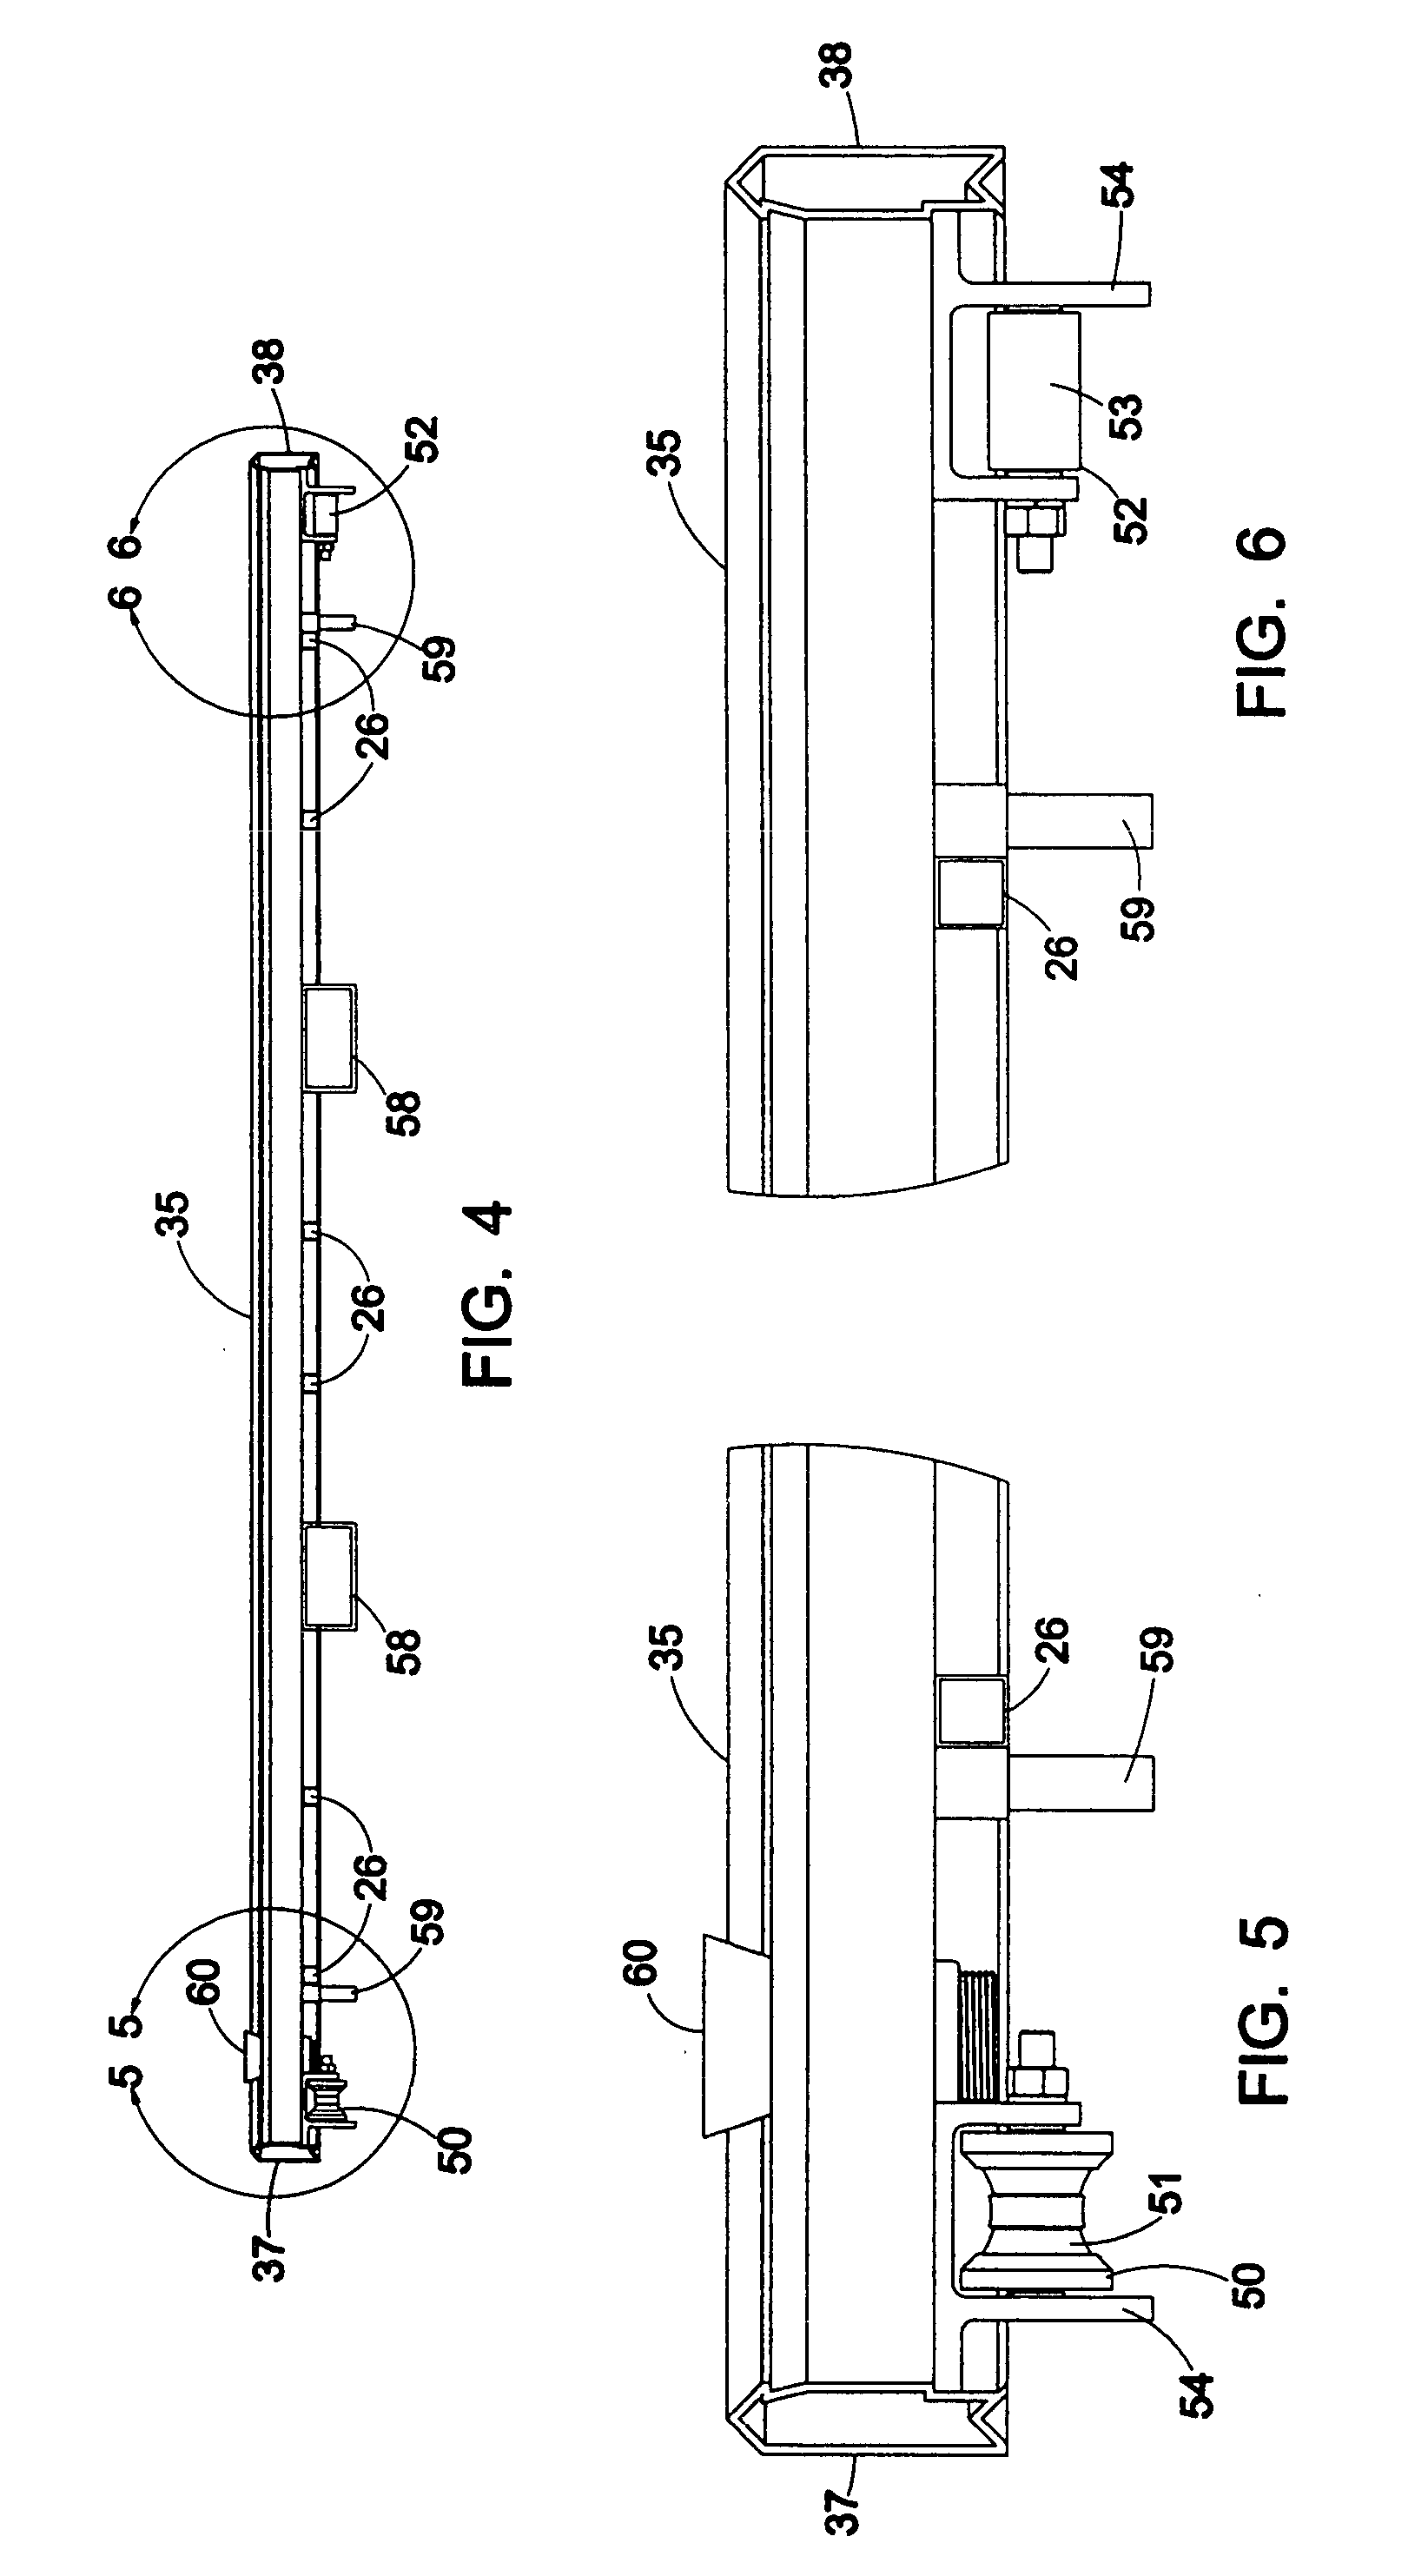 Apparatus and methods for handling and controlling the nurturing of plants